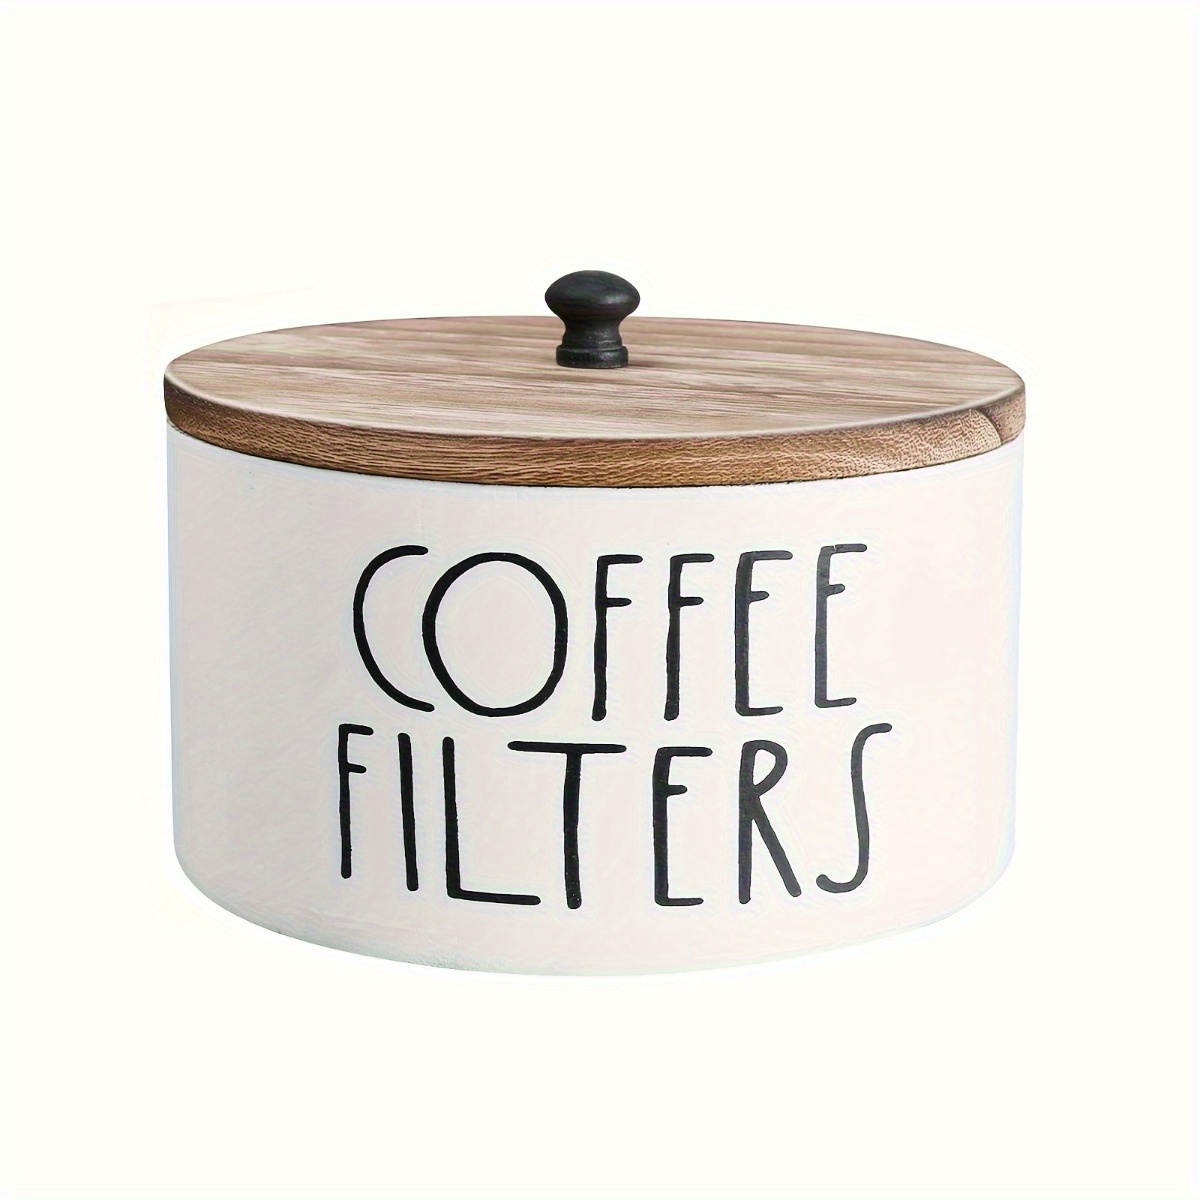 

1pc Storage Container, Wooden Coffee Filter Holder With Lid, Rustic Farmhouse Style Storage Container, For Home Kitchen, Office And Coffee Bar Counter, Home Organizers And Storage, Home Accessories